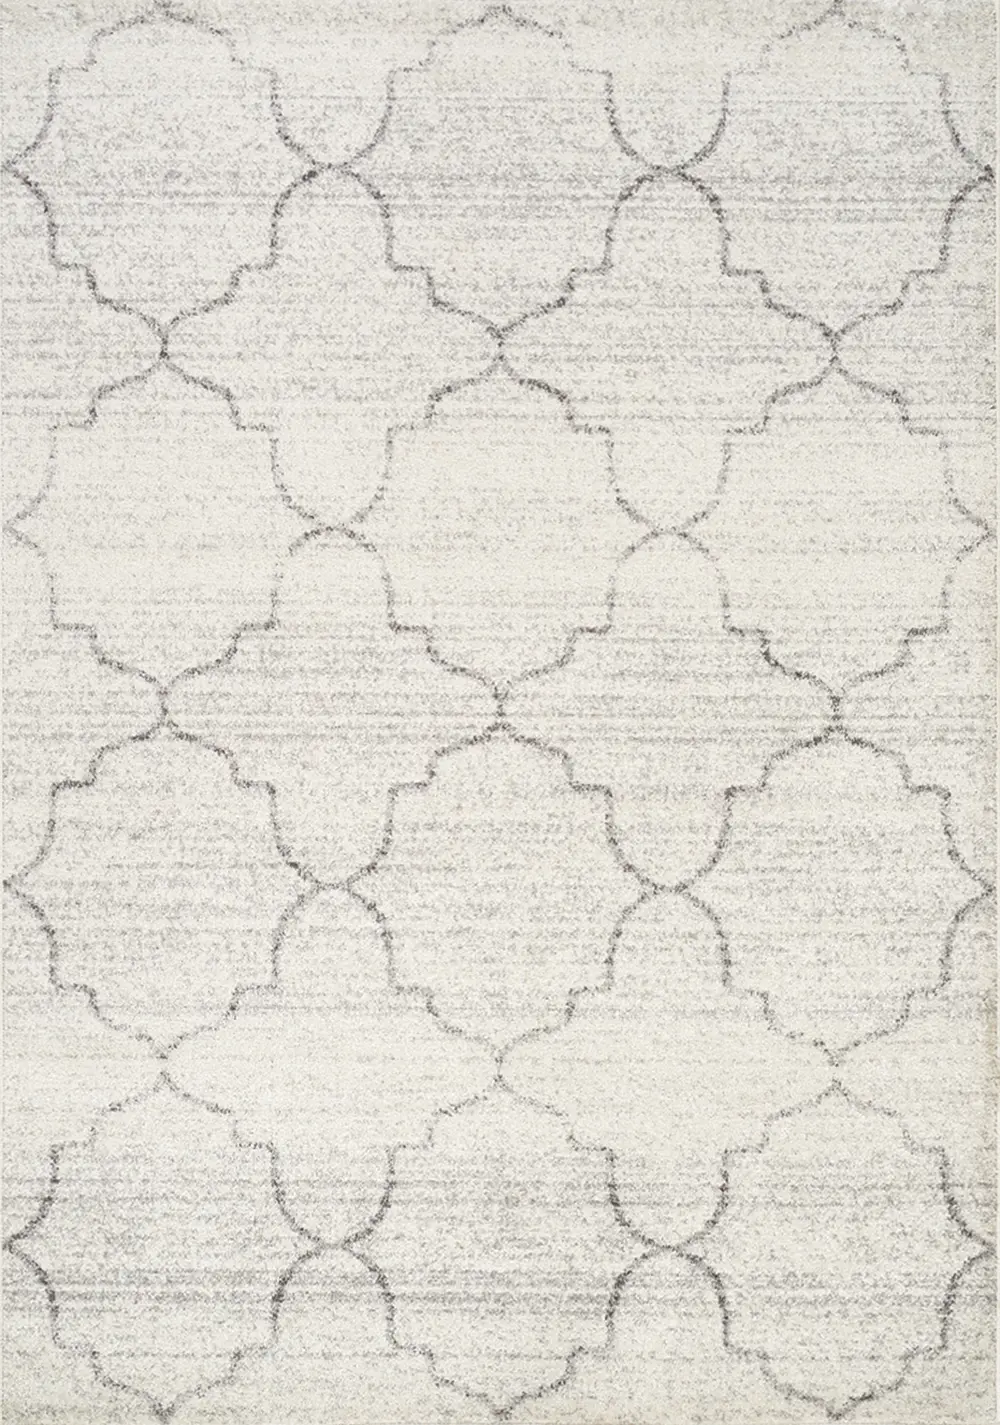 8 x 11 Large Ogee White and Gray Area Rug - Focus-1